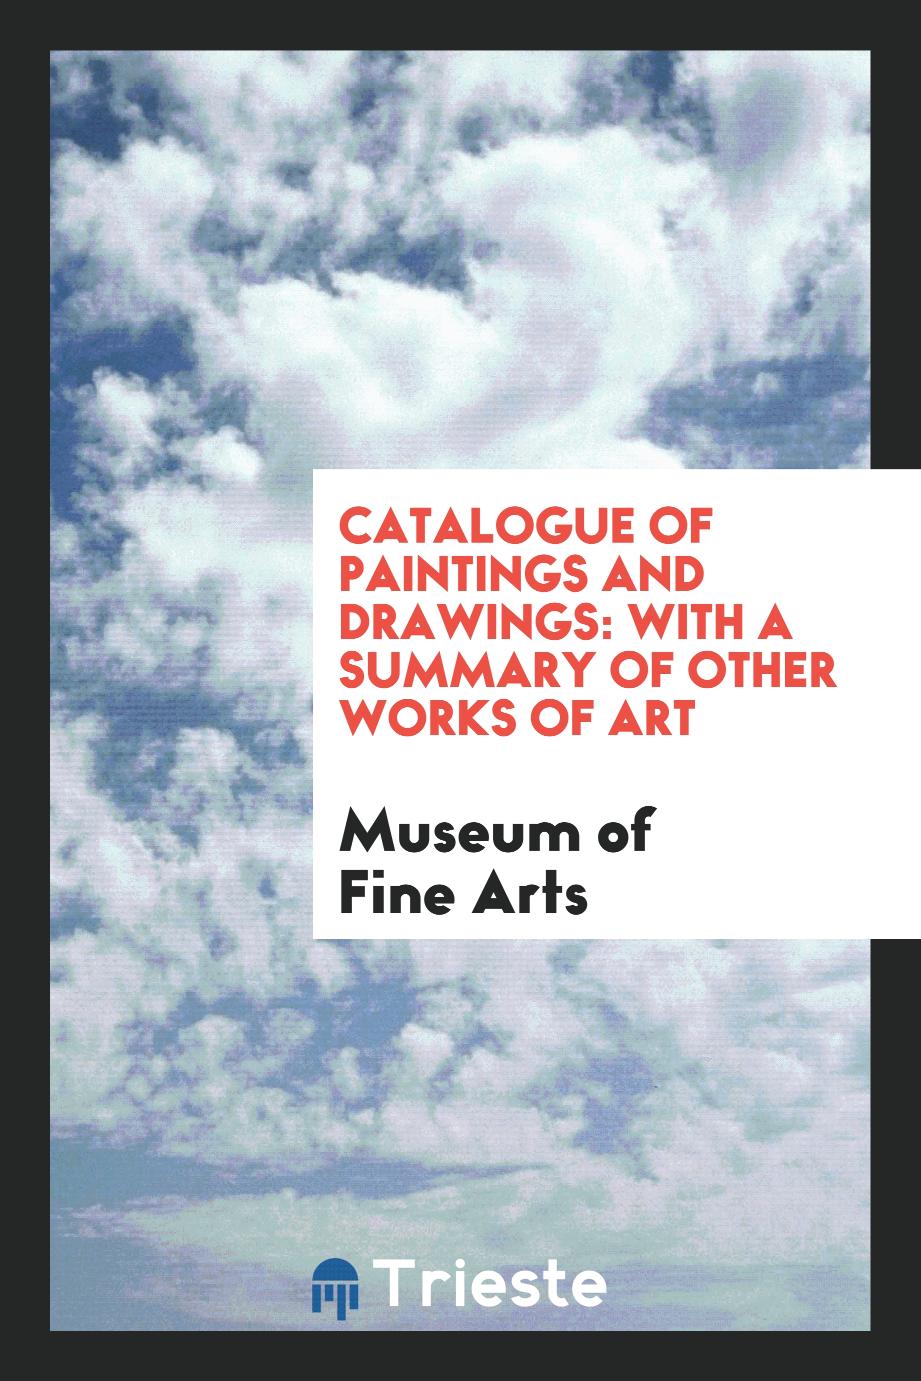 Catalogue of Paintings and Drawings: With a Summary of Other Works of Art